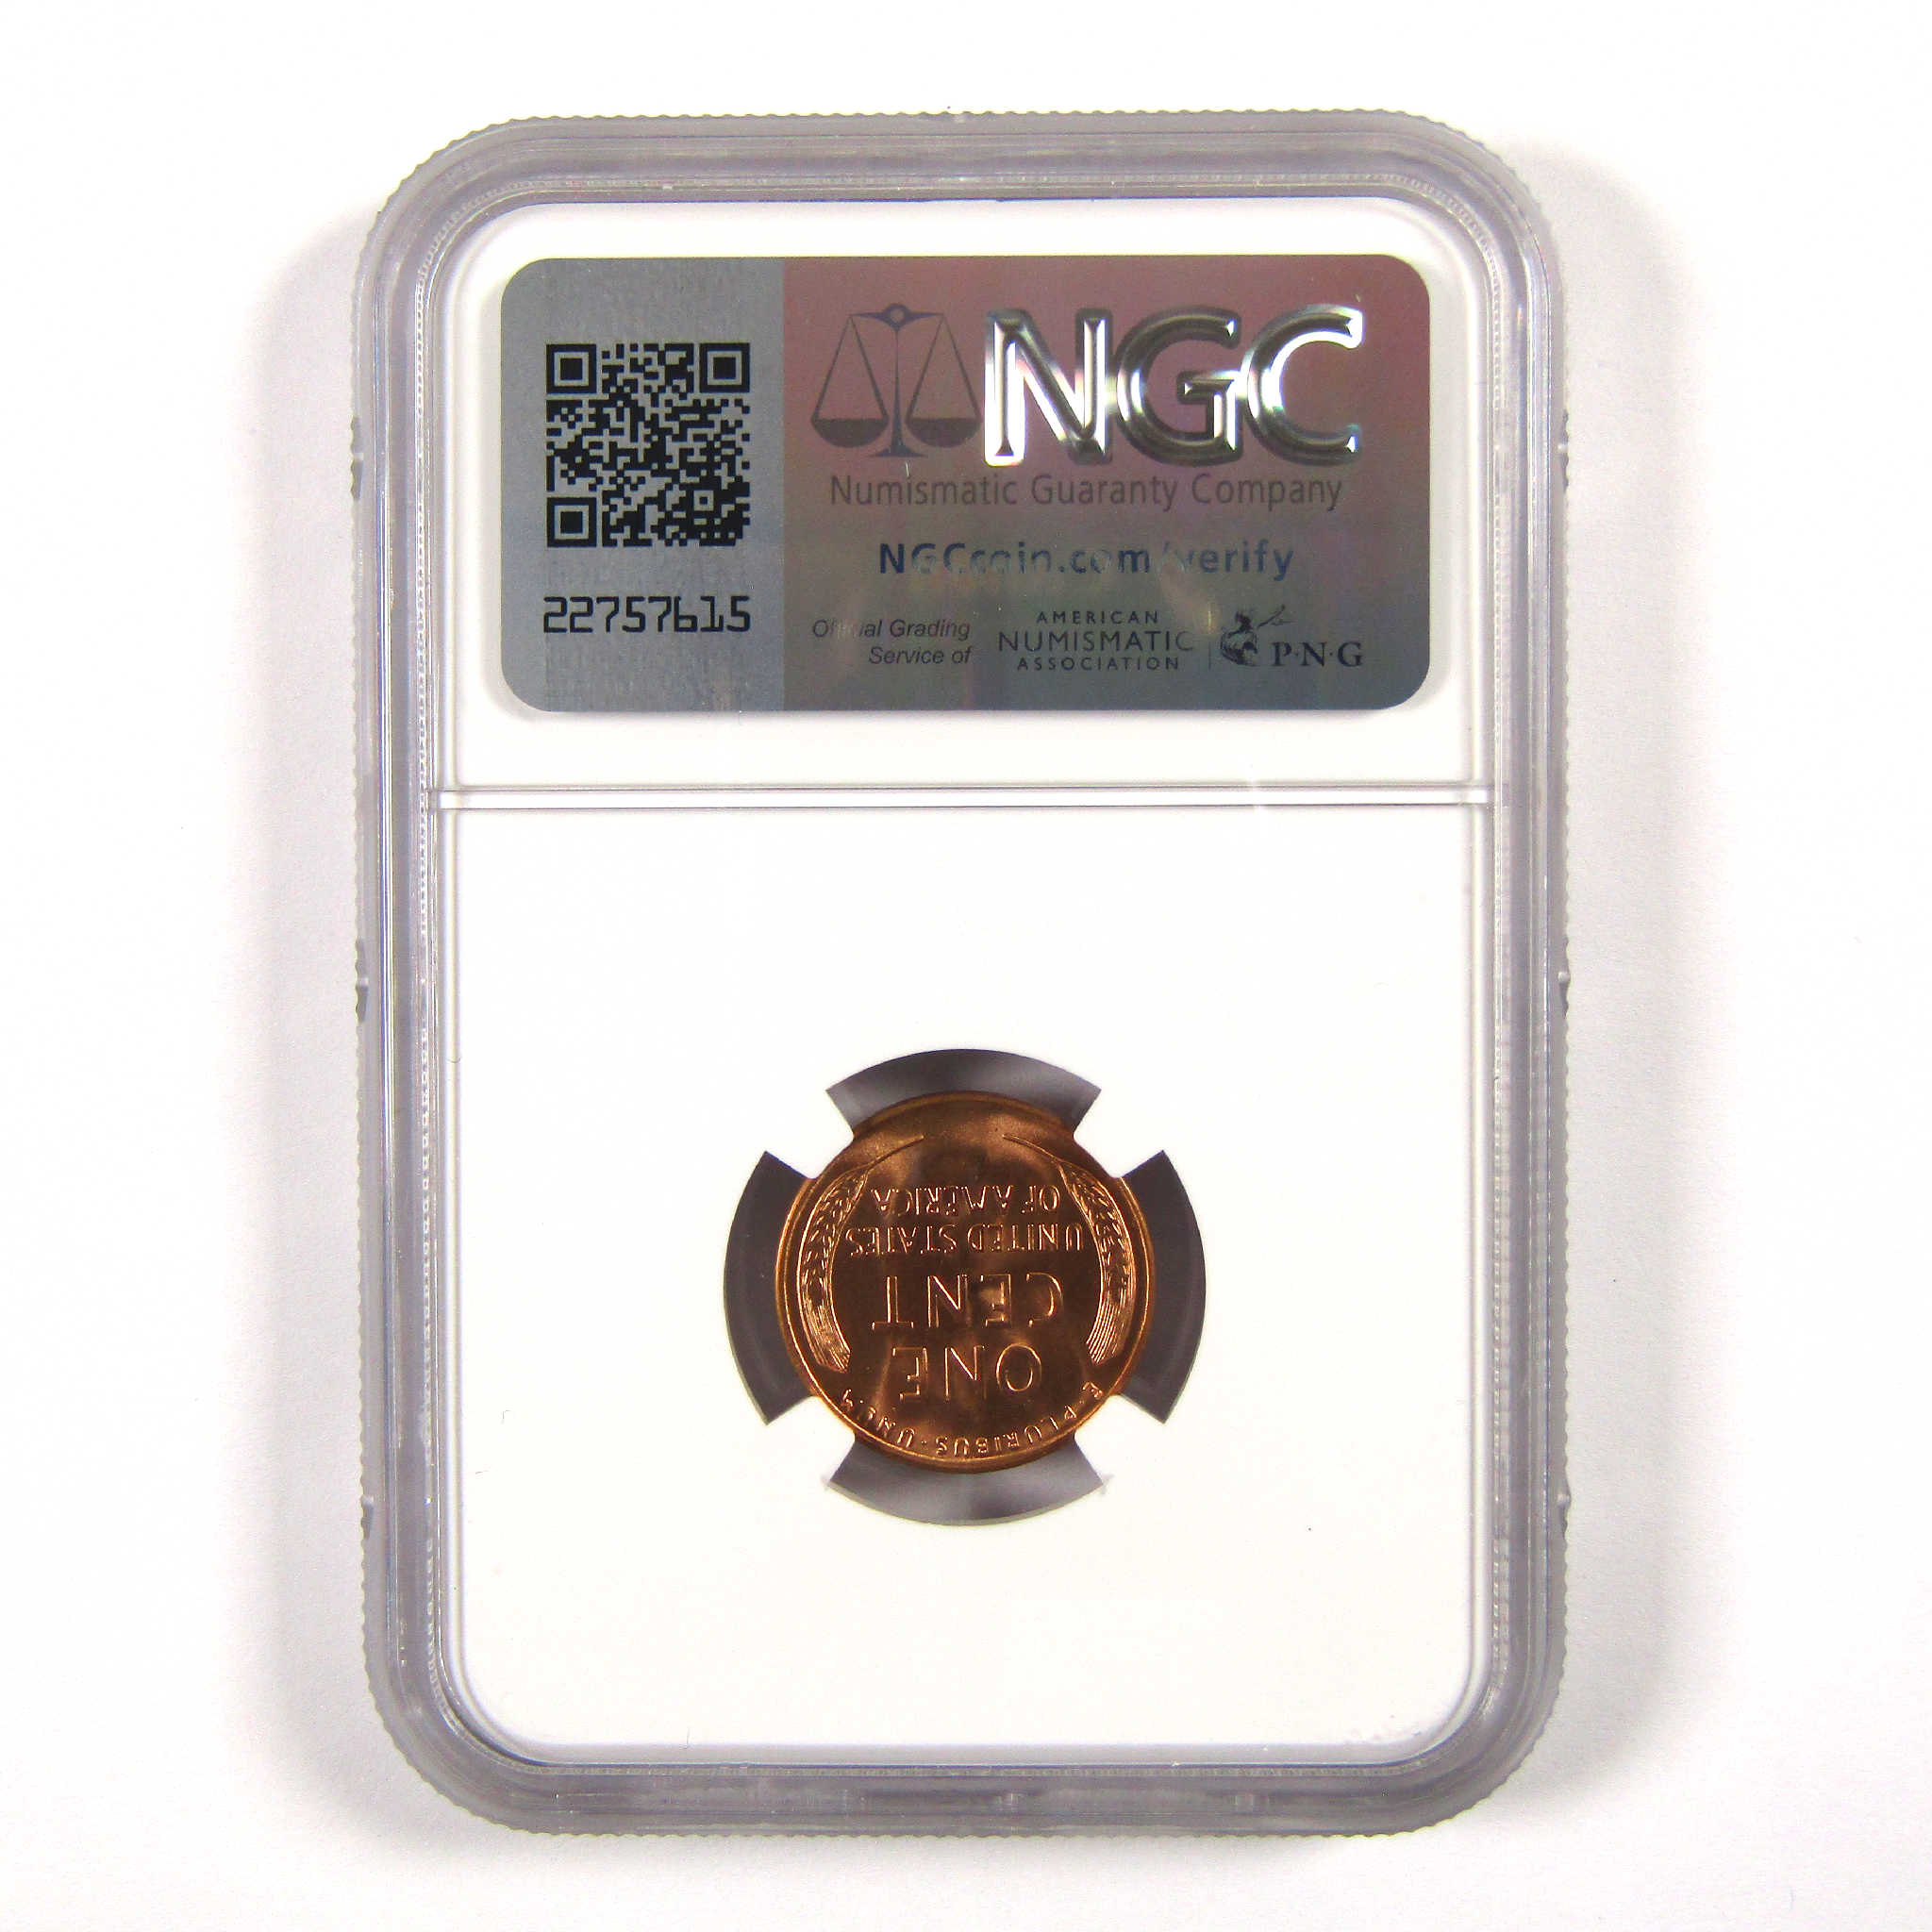 1954 S Lincoln Wheat Cent MS 66 RD NGC Penny 1c Unc SKU:I11577